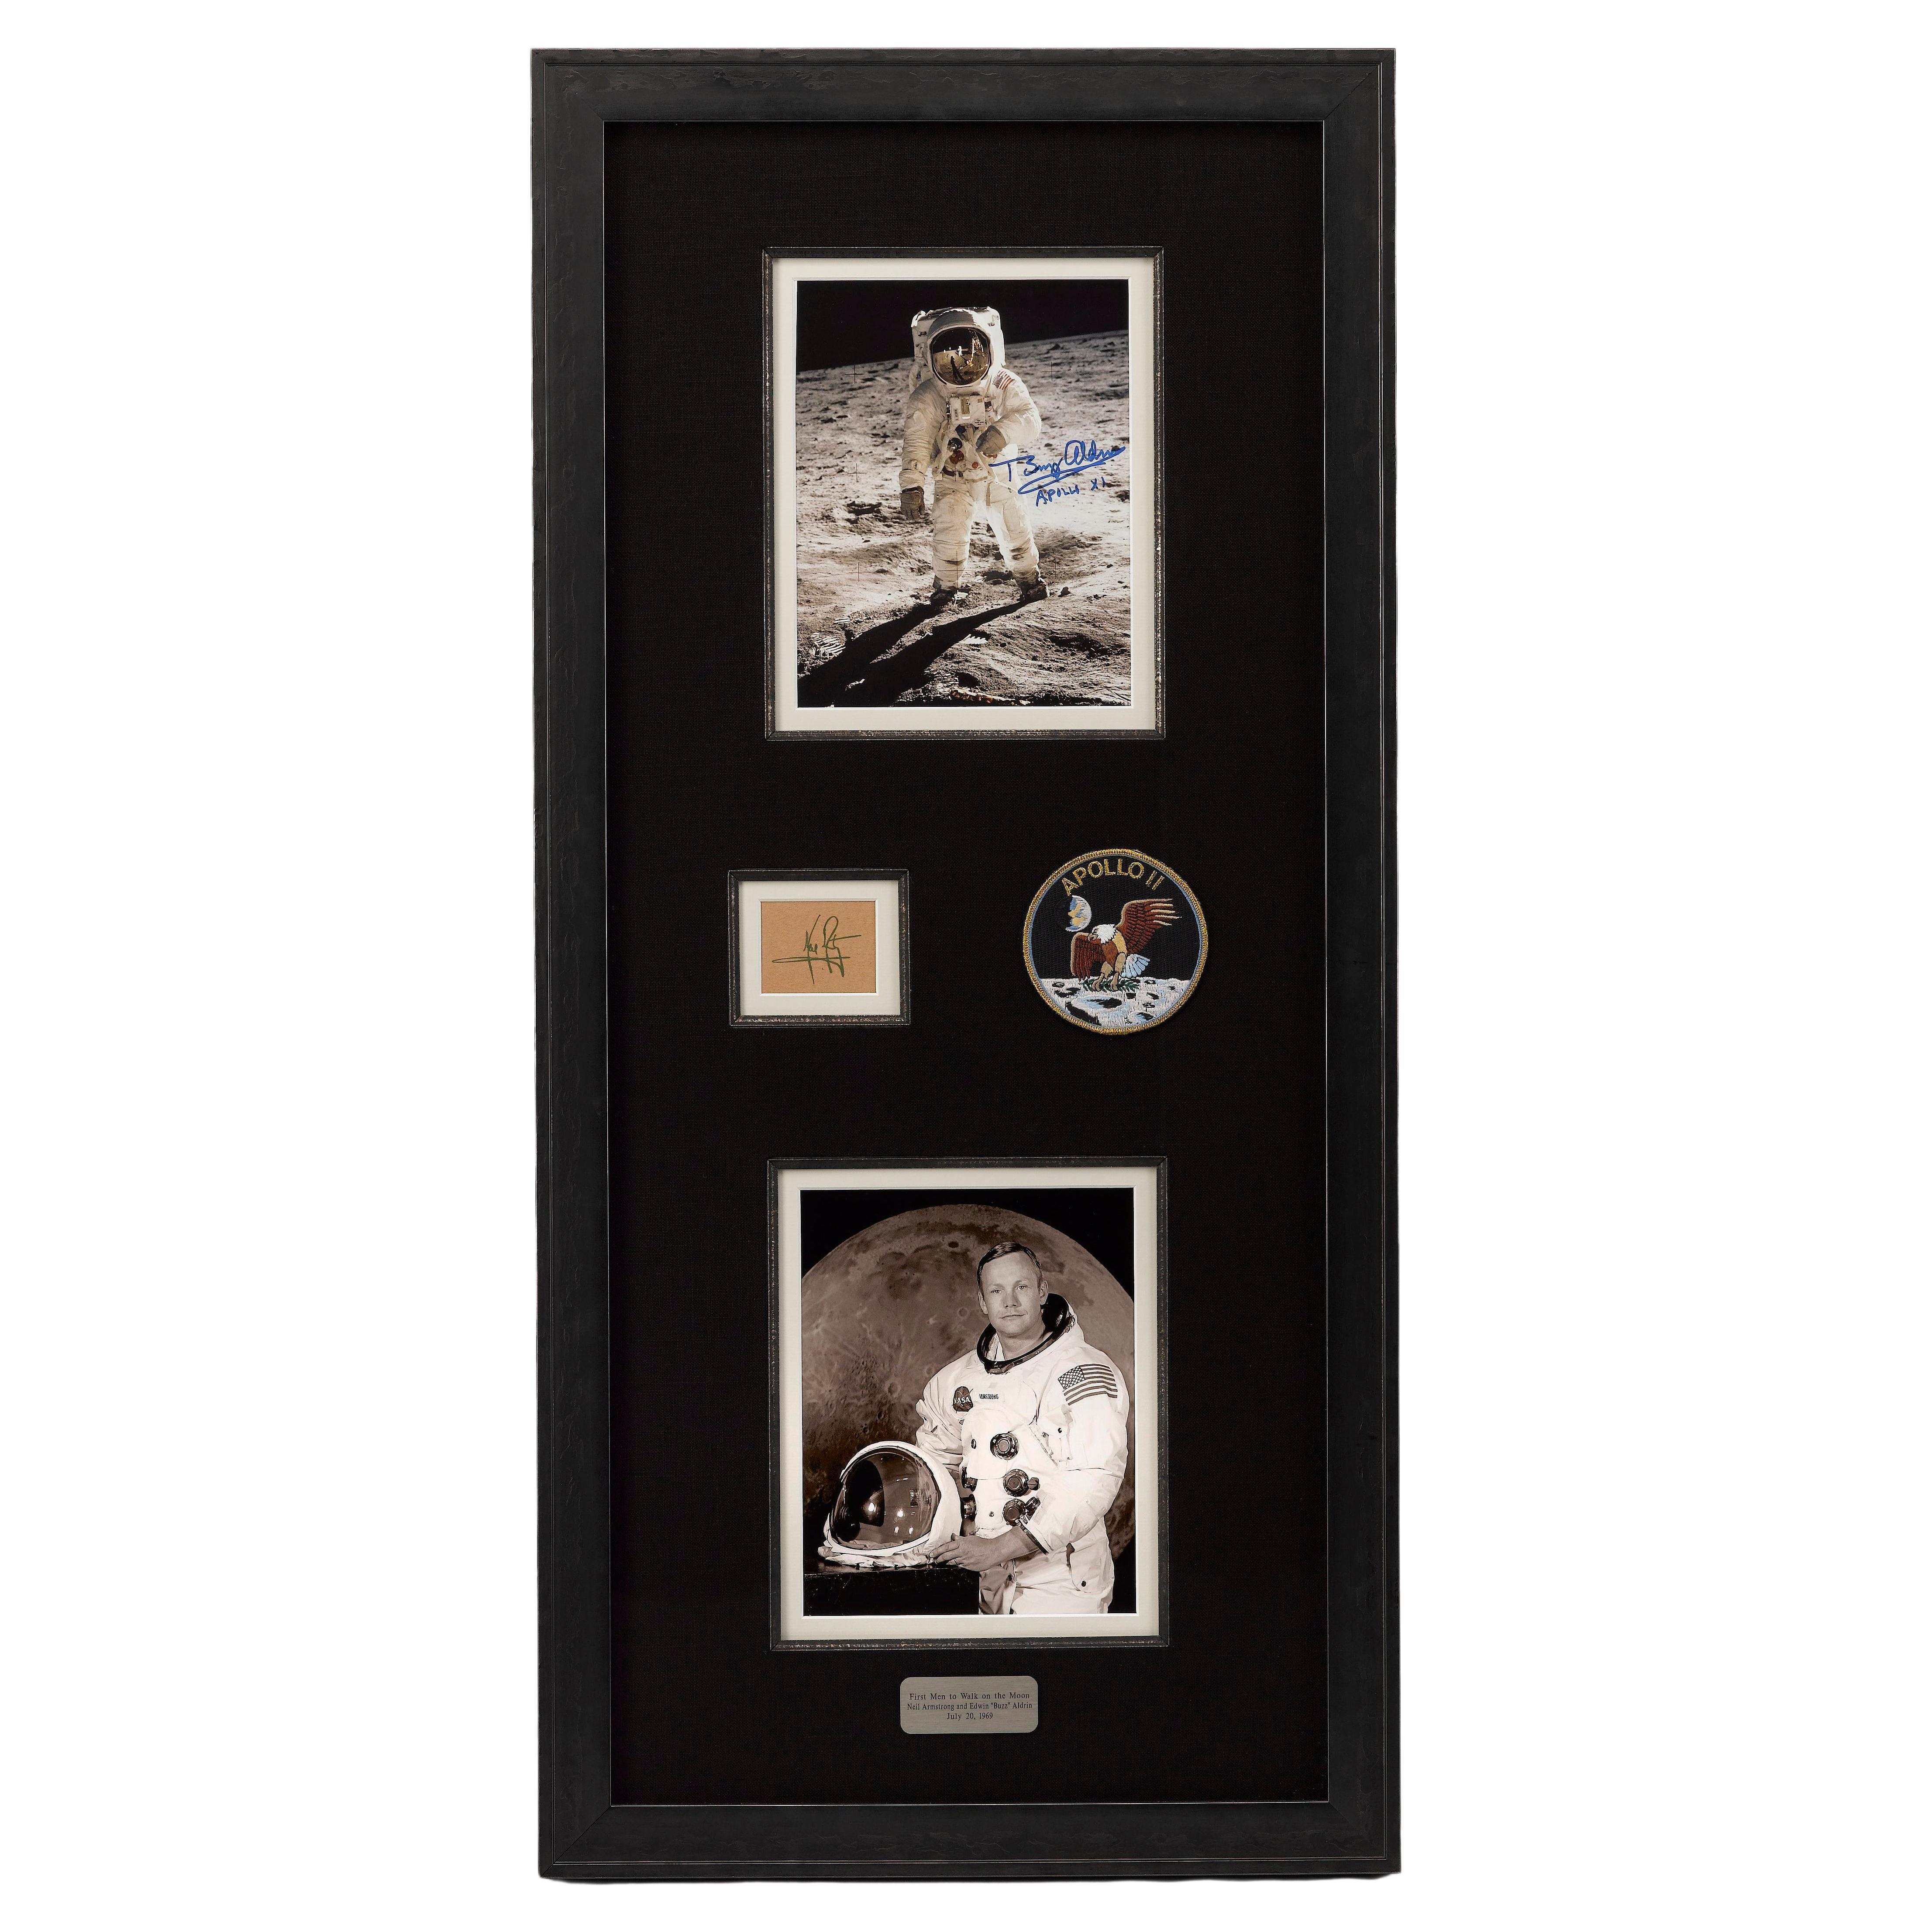 Buzz Aldrin and Neil Armstrong Signature Collage